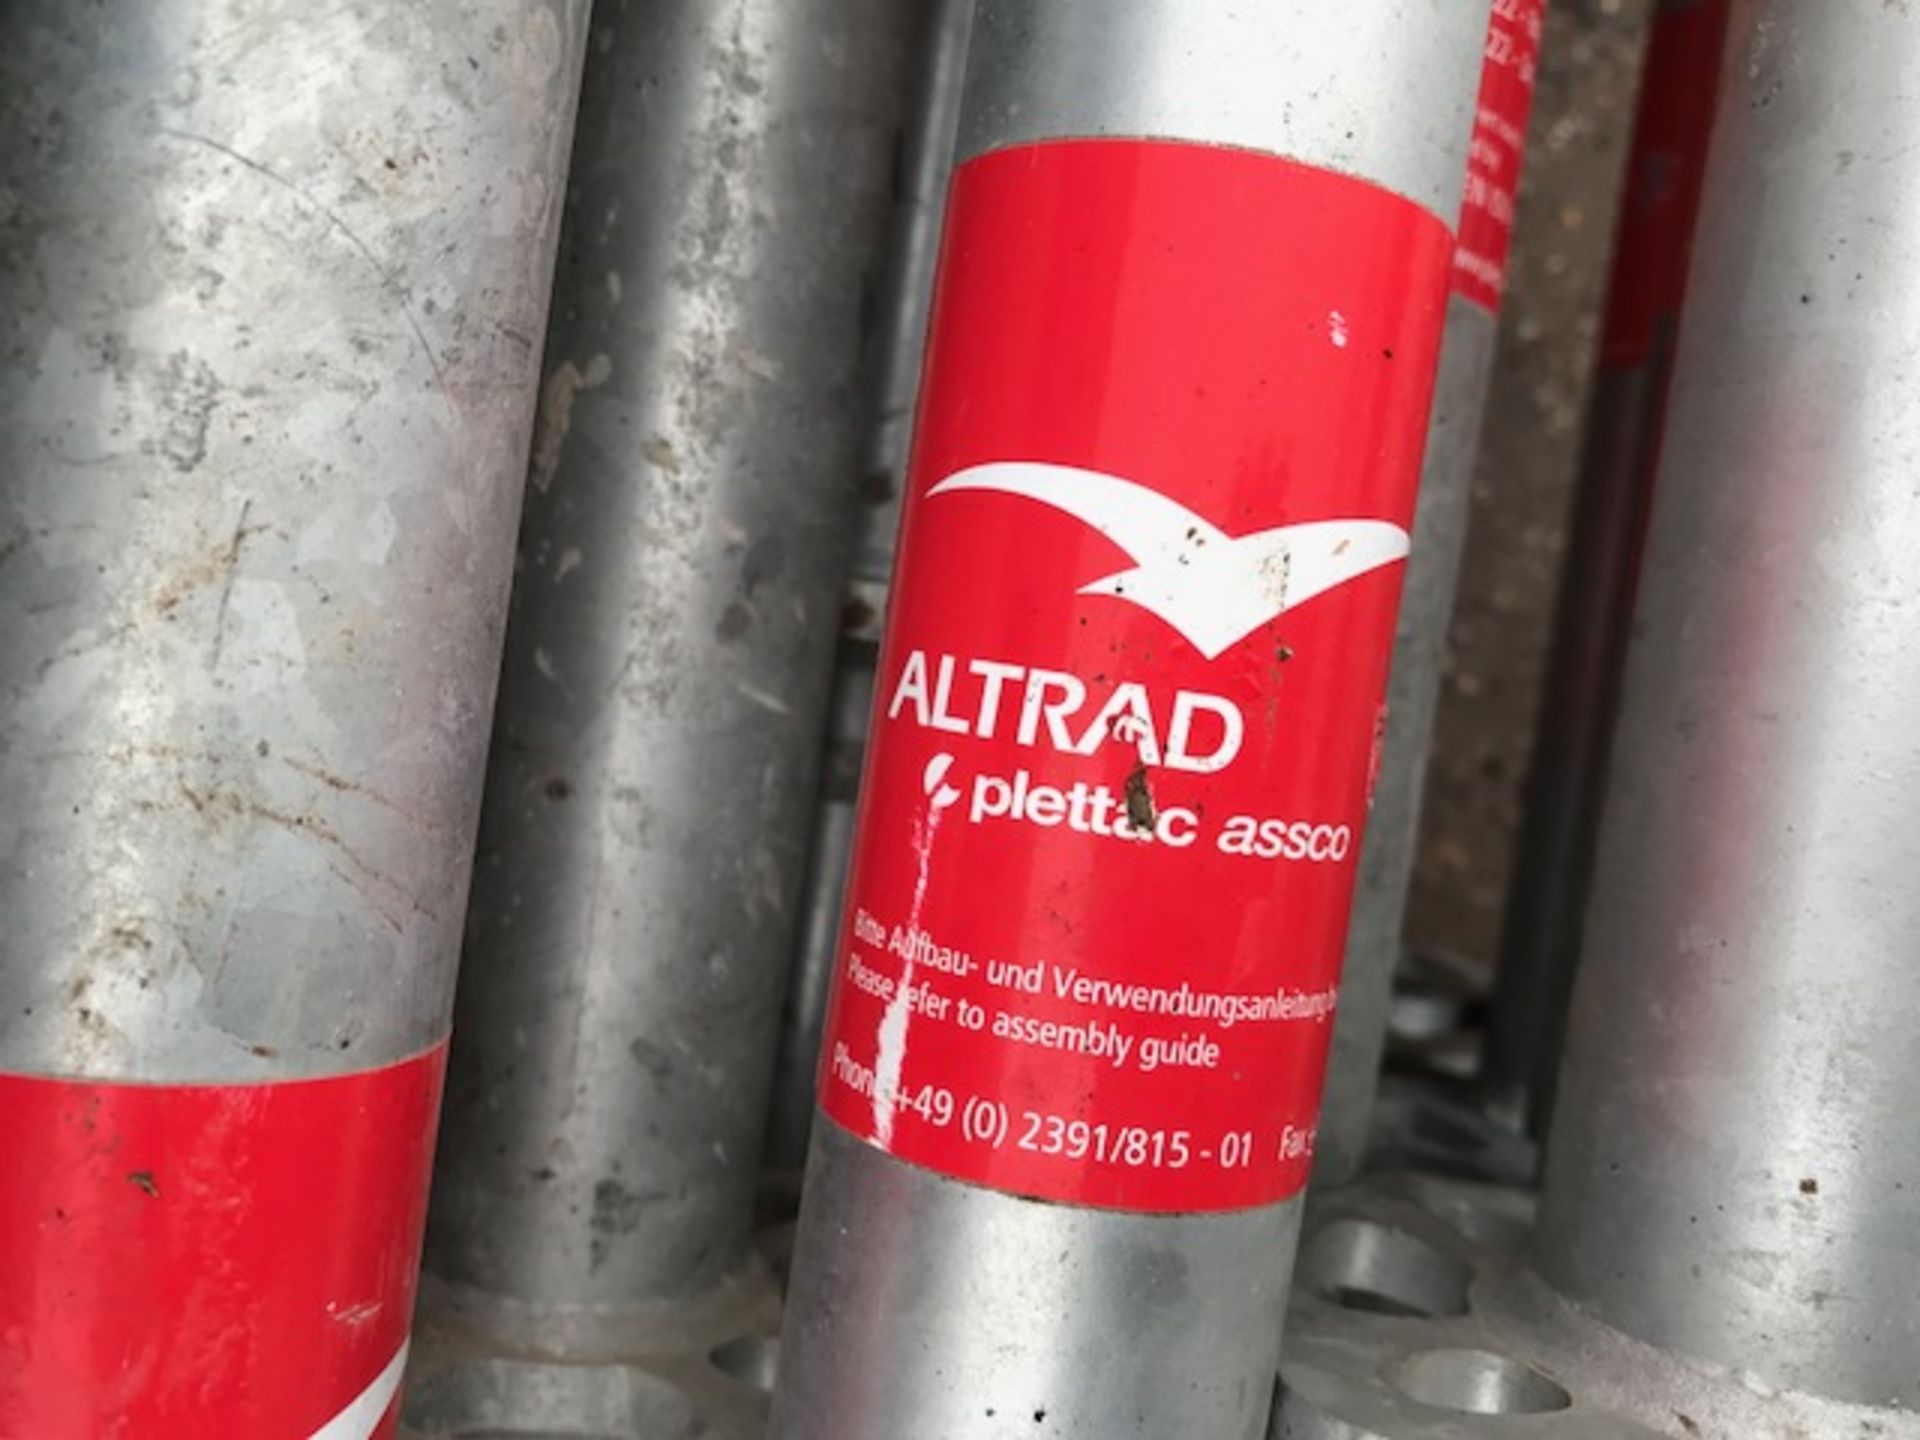 LARGE QUANTITY OF ALTRAD PLETTAC ASSCO STAIRWAY SCAFFOLDING SYSTEM PARTS - Image 9 of 12